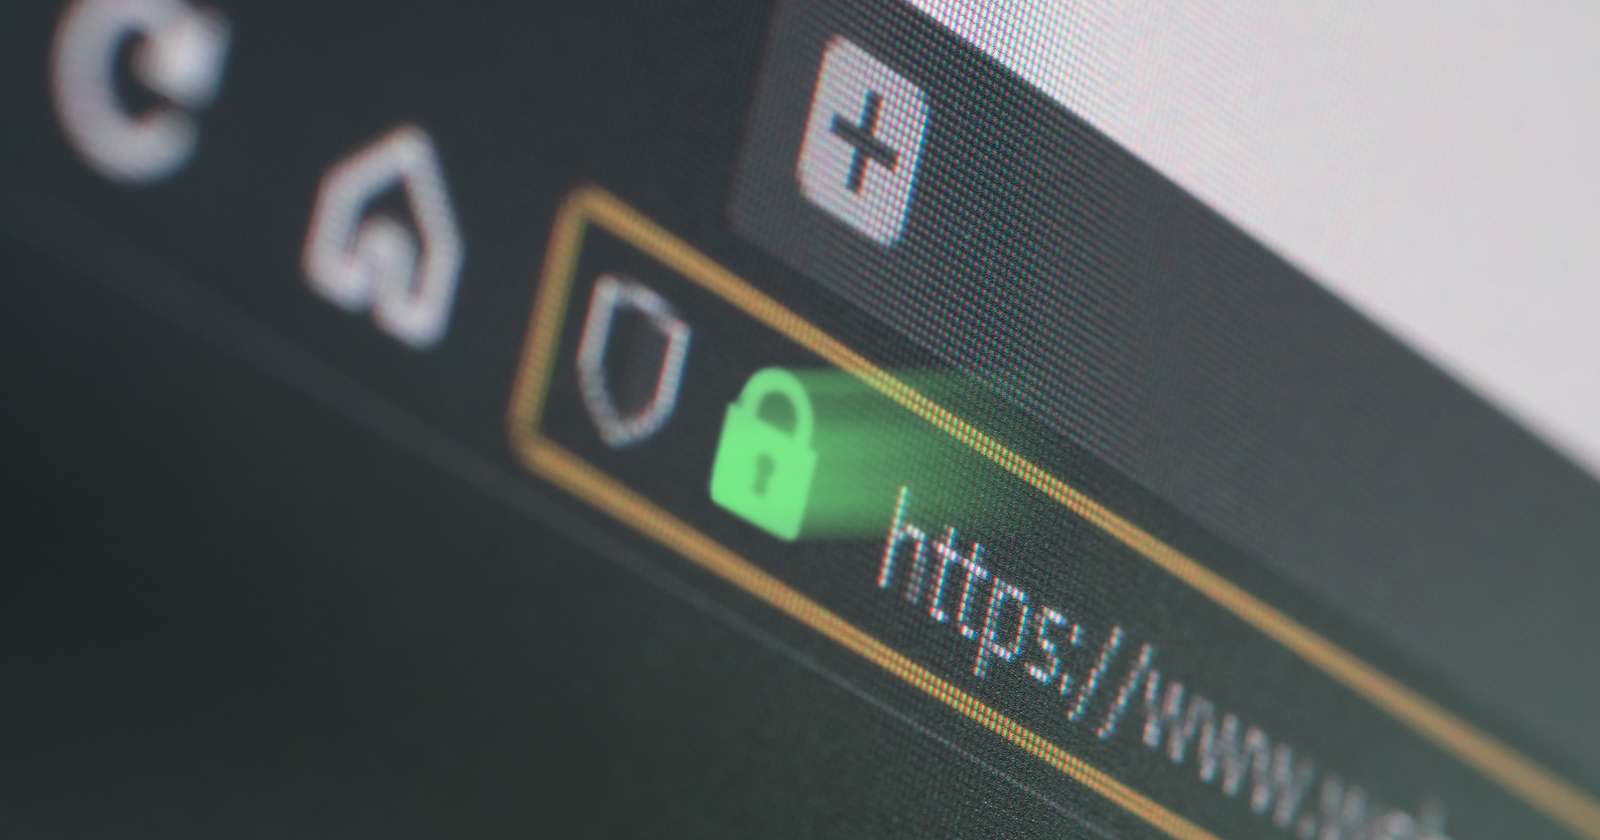 SSL File Extensions and Formats - Beginners Guide